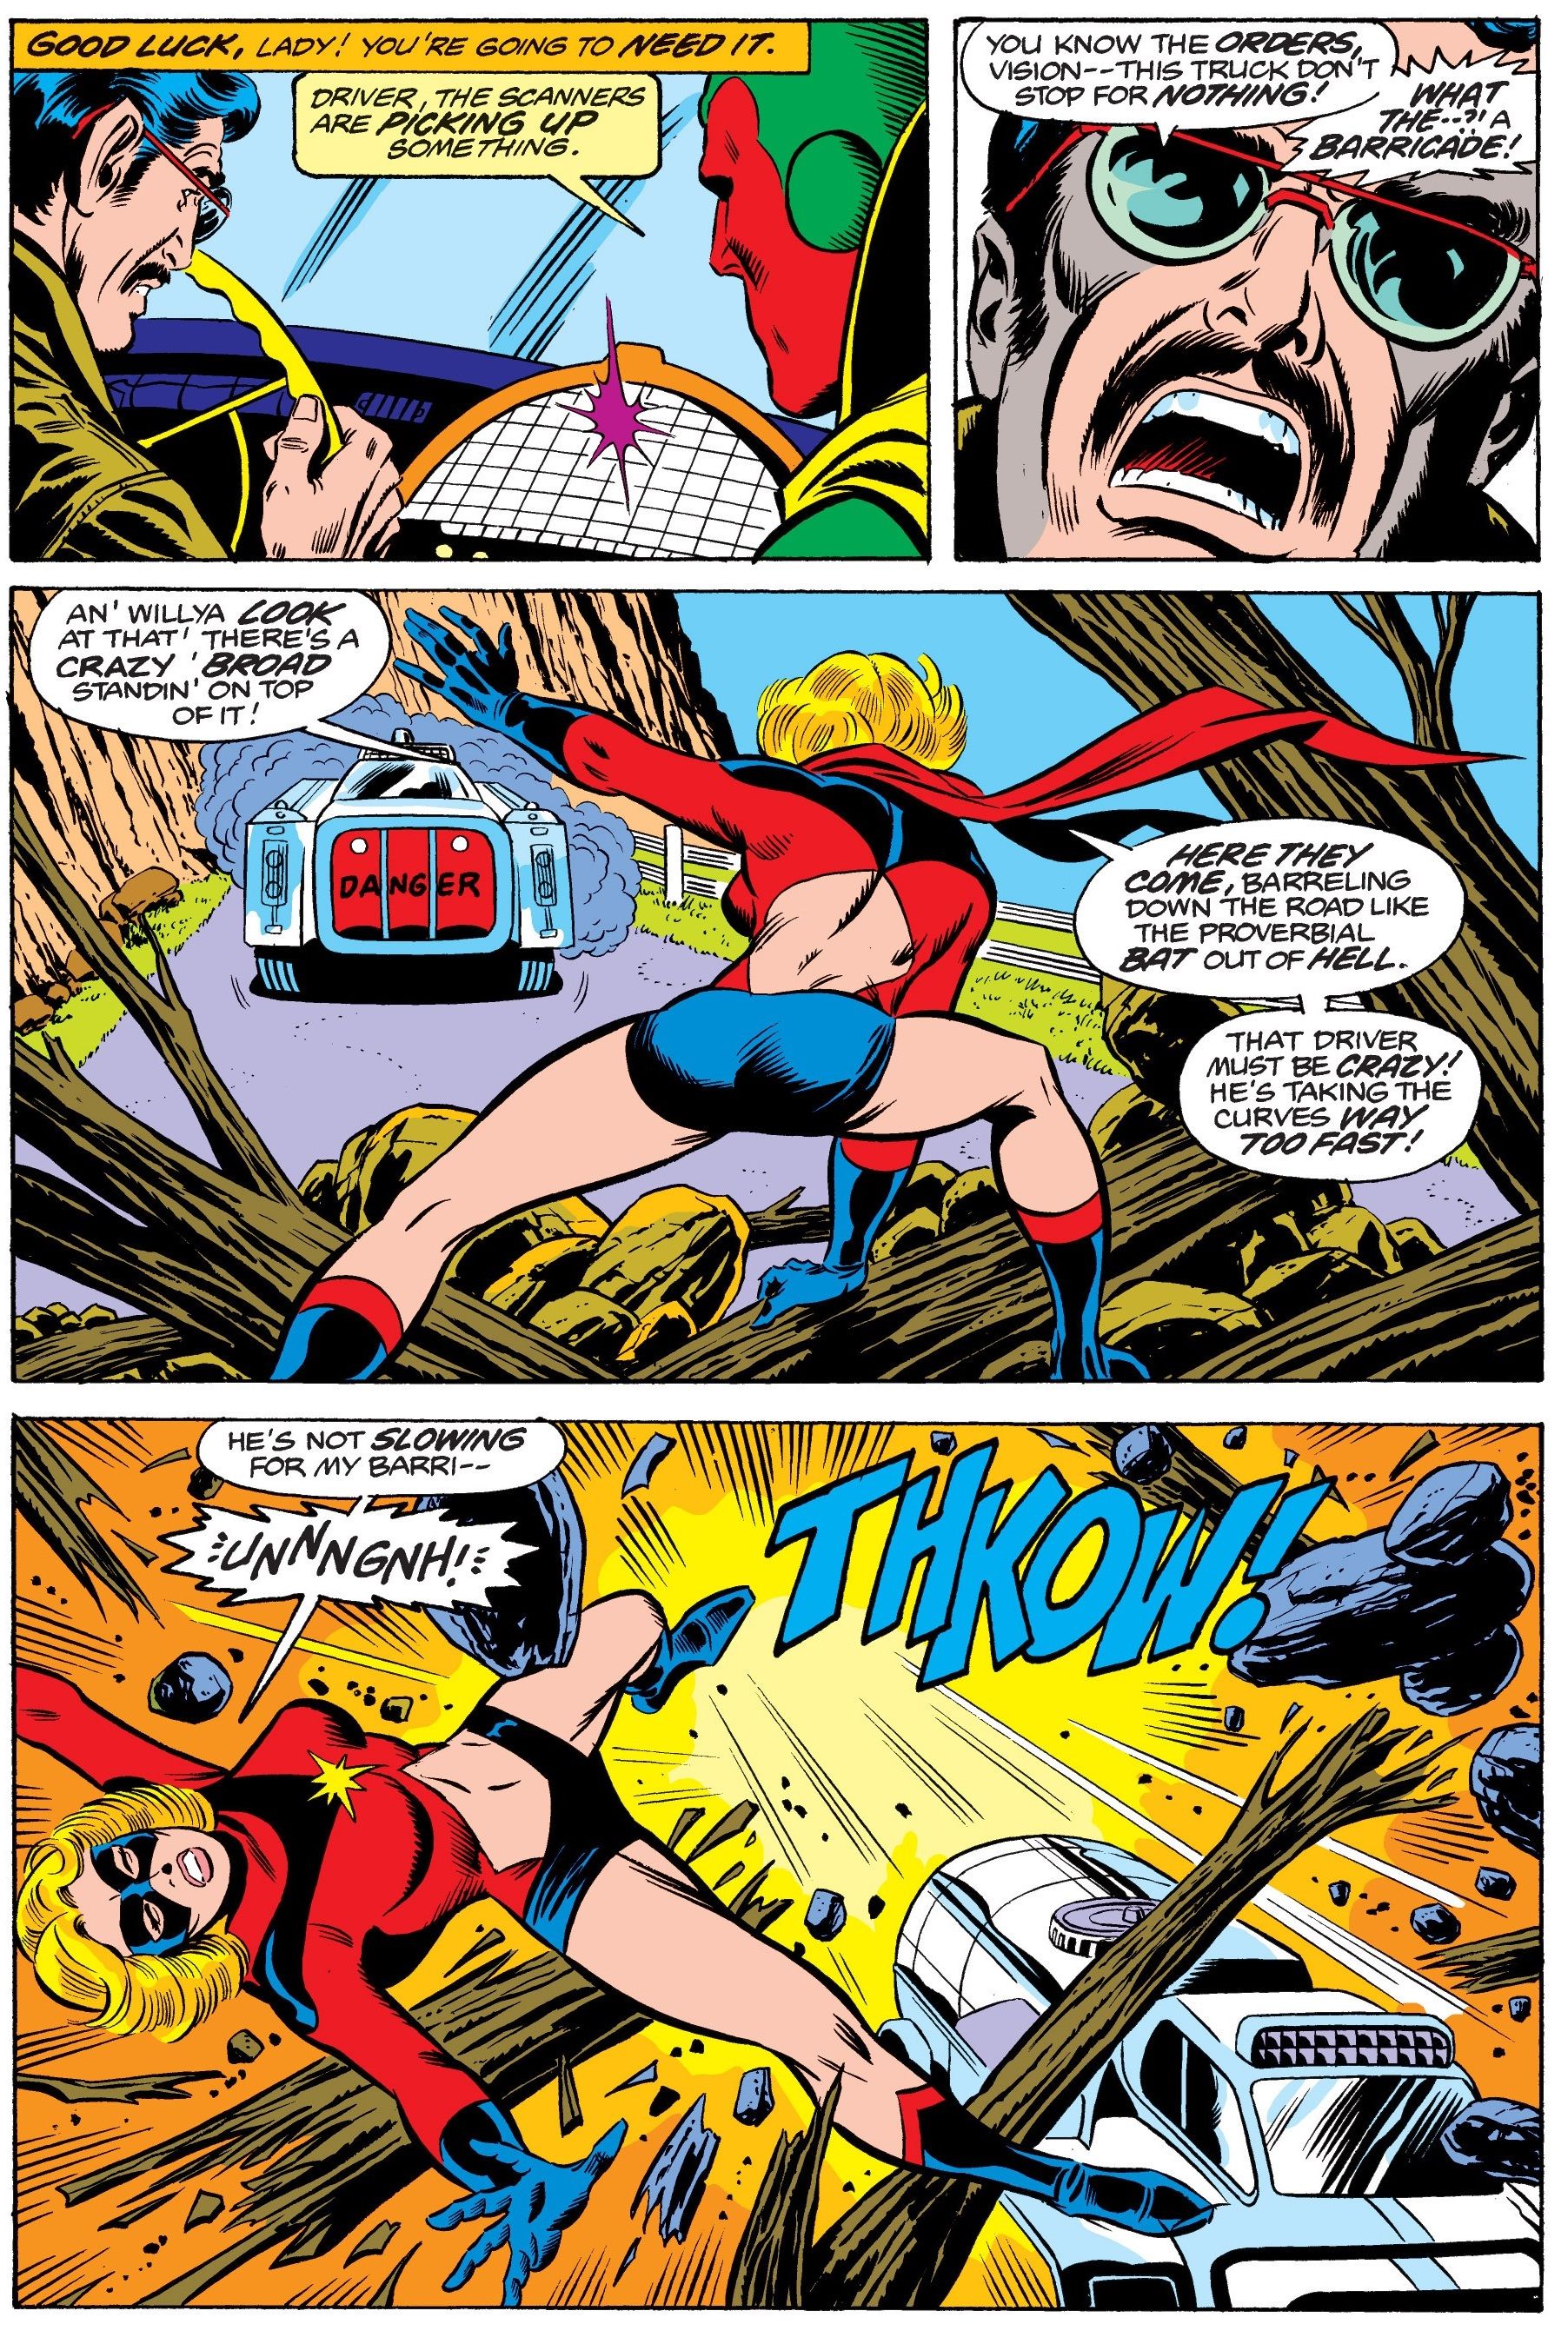 Ms. Marvel tries to stop a Stark super-car